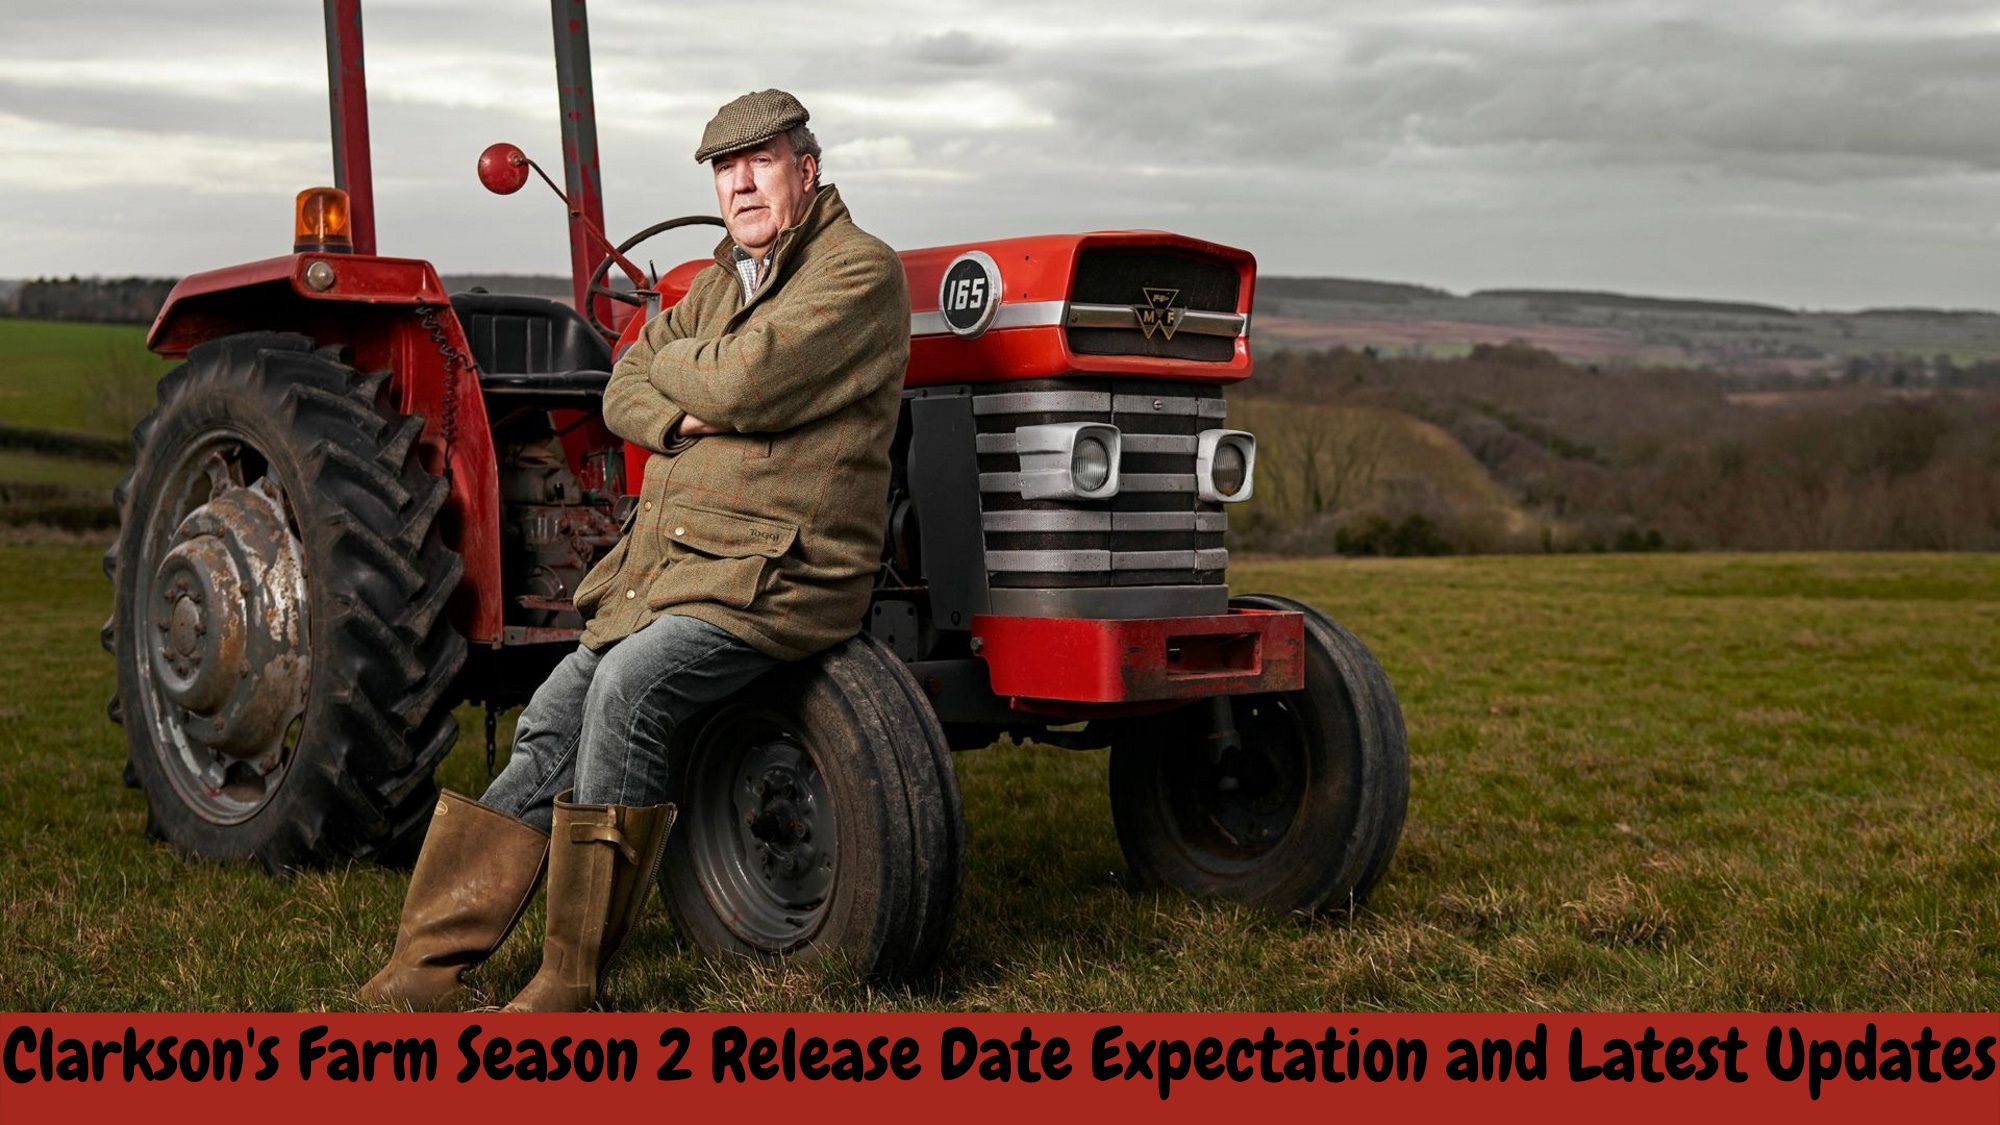 Clarkson's Farm Season 2 Release Date Expectation and Latest Updates